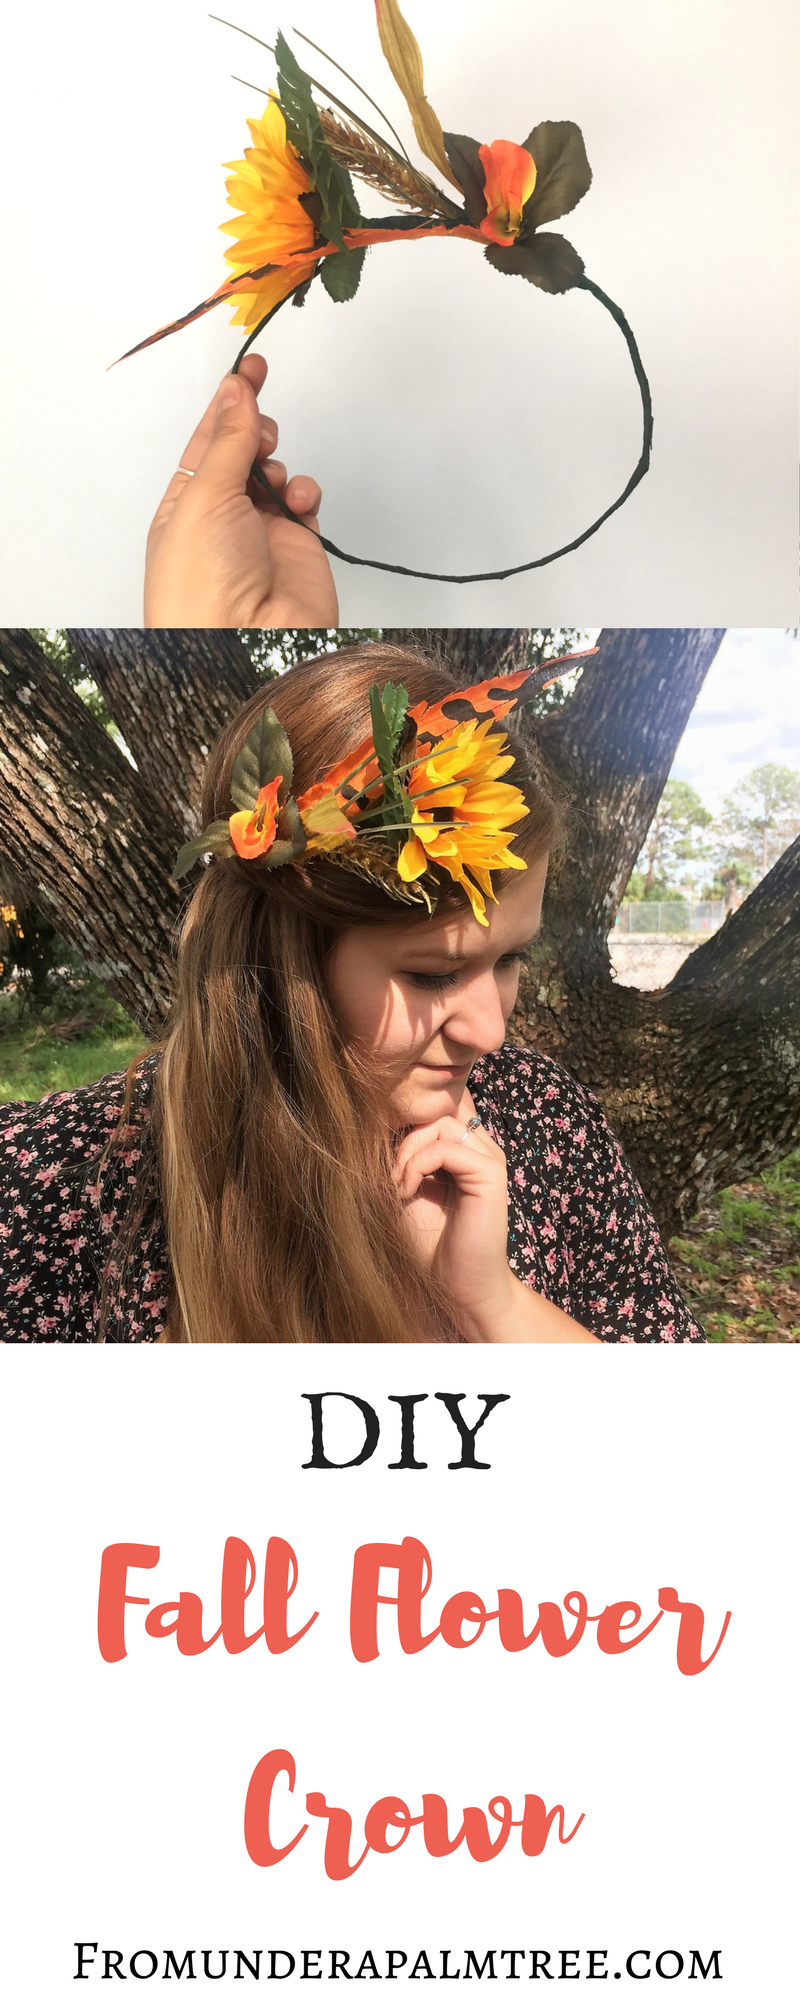 How to make a fall flower crown | DIY fall flower crown | DIY flower crown | Dollar store flower crown | Dollar store DIY | dollar tree DIY | DIY | fall flowers |